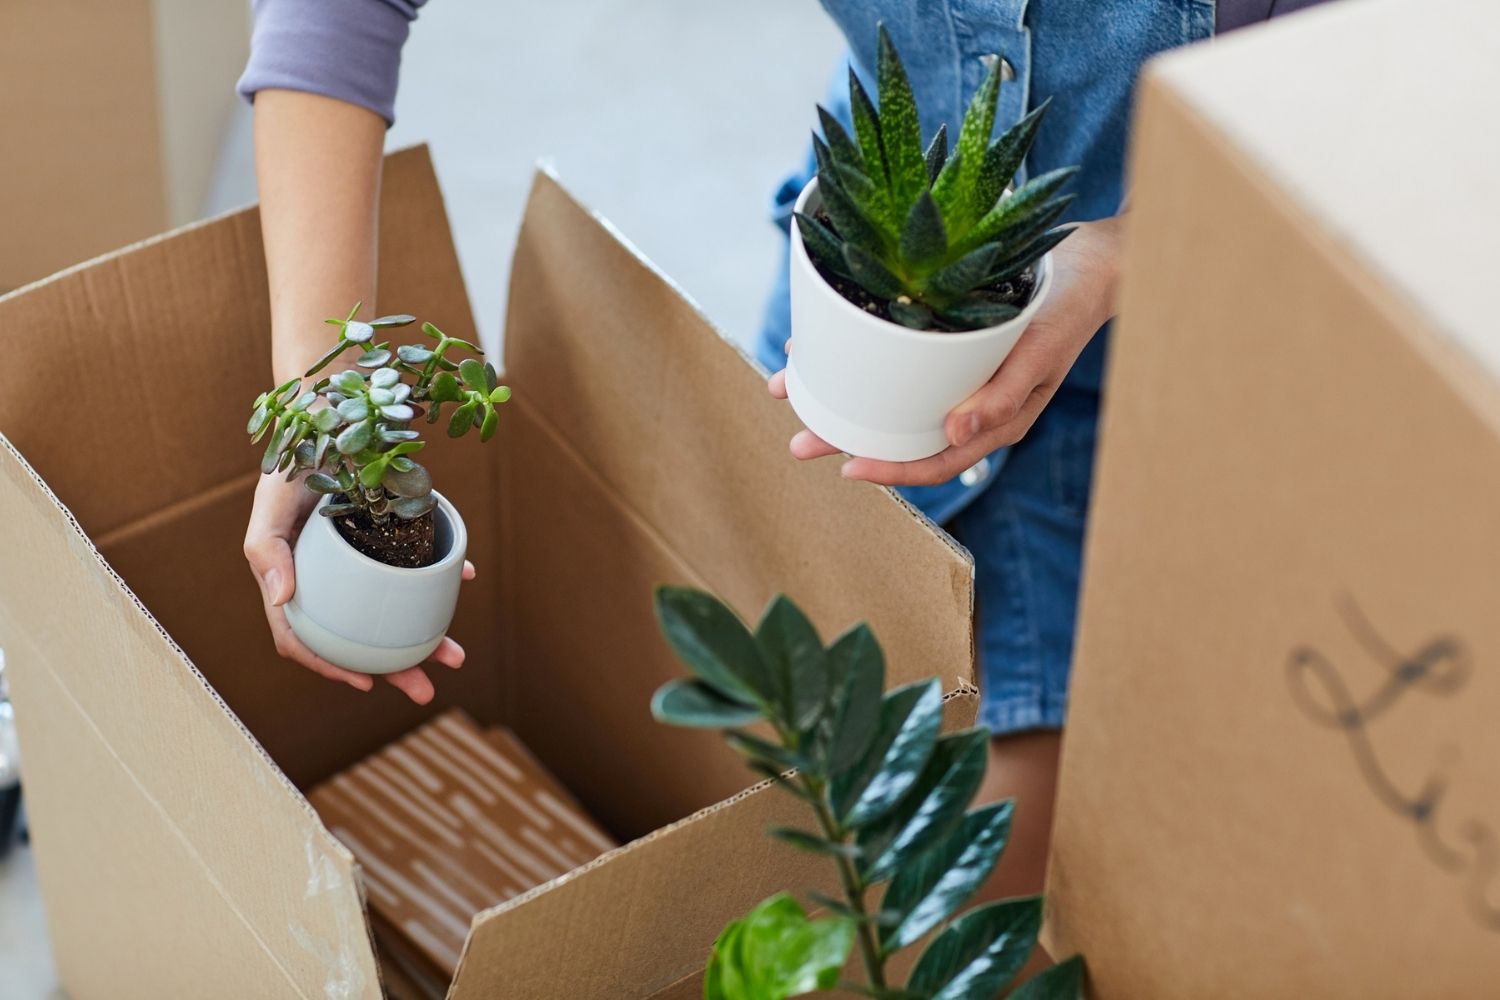 The Best Plant Delivery Service Option: The Home Depot